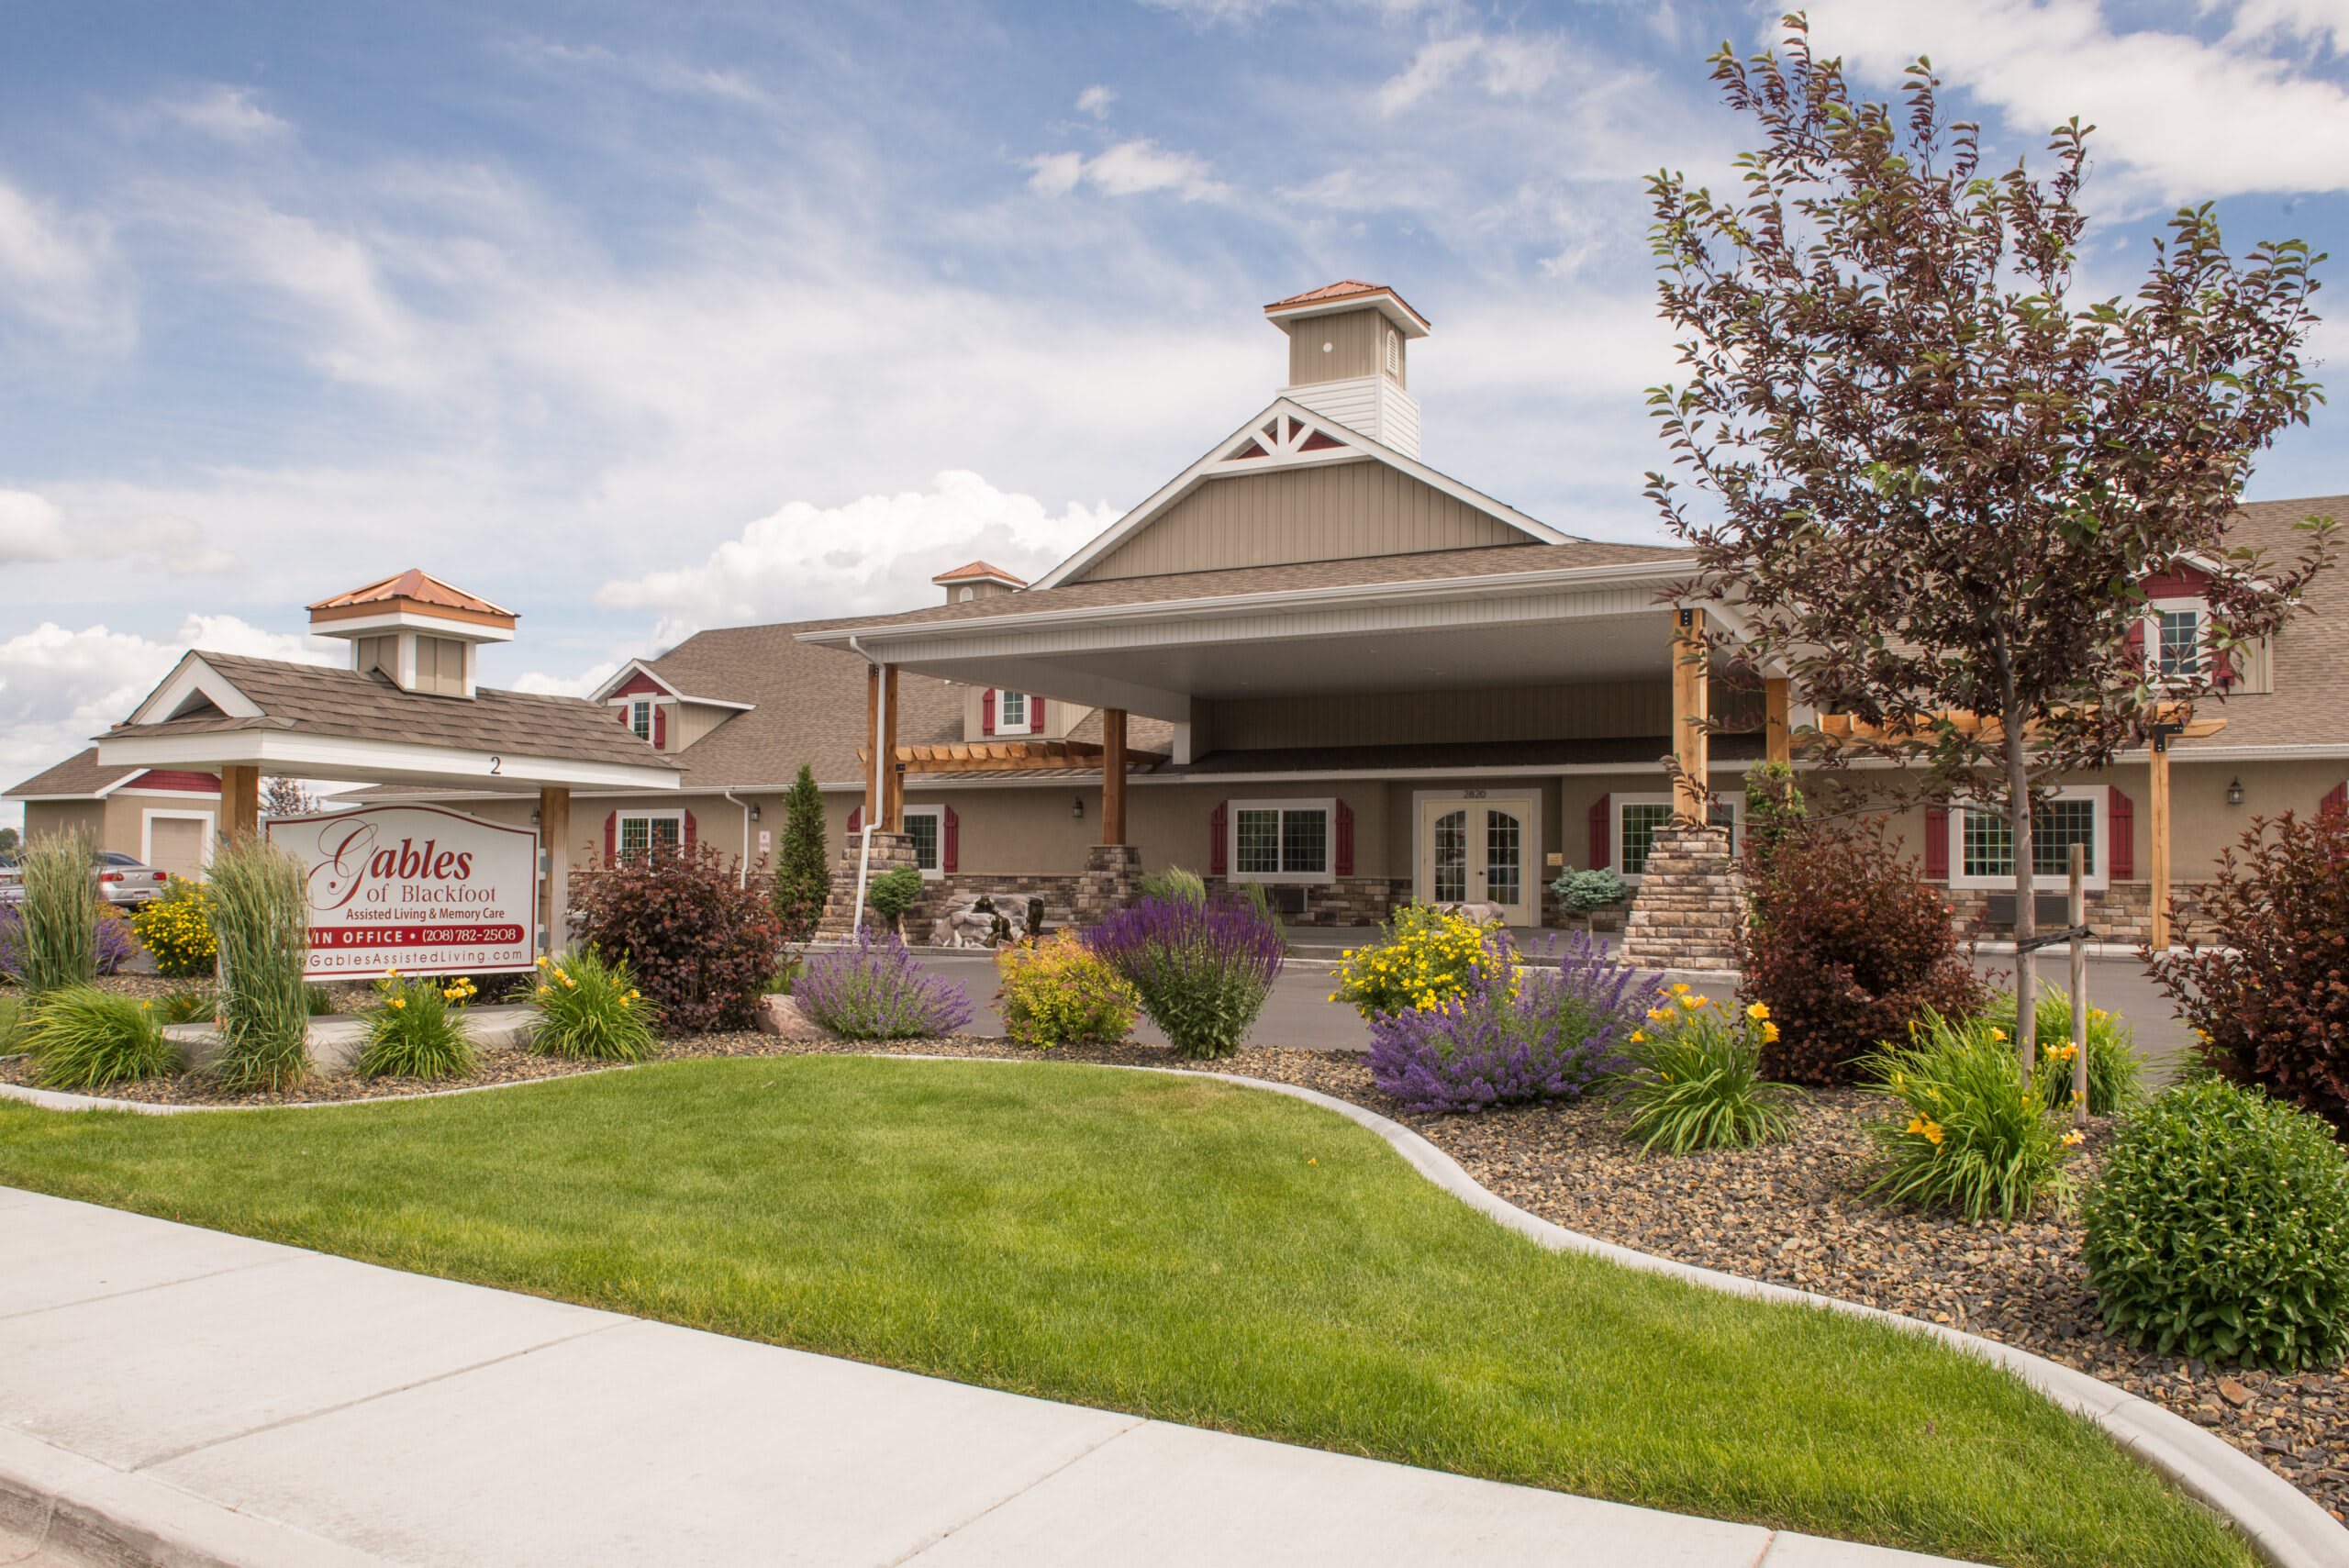 The Gables of Blackfoot Assisted Living